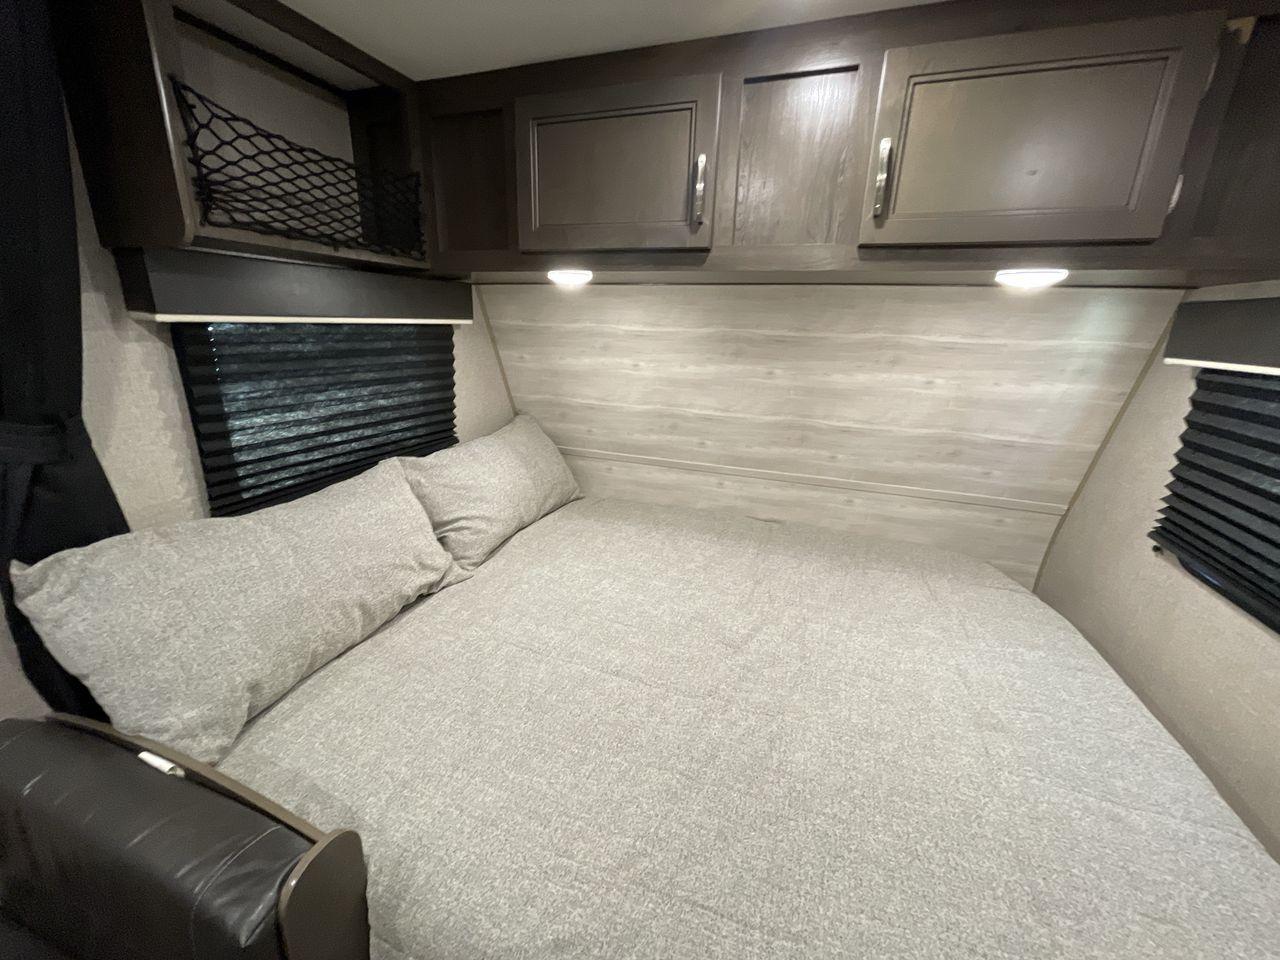 2021 JAYCO JAY FLIGHT SLX 174BH (1UJBJ0AJ1M1) , Length: 21.67 ft | Dry Weight: 3,075 lbs | GVWR: 3,950 lbs | Slides: 0 transmission, located at 4319 N Main Street, Cleburne, TX, 76033, (817) 221-0660, 32.435829, -97.384178 - Take the 2021 Jayco Jay Flight SLX 174BH travel trailer out on your camping adventures. This lightweight and small RV is ideal for people looking for an affordable and cozy way to enjoy the great outdoors. The dimensions of this unit are 21.67 ft in length, 7.08 ft in width, and 9.17 ft in height. I - Photo #16